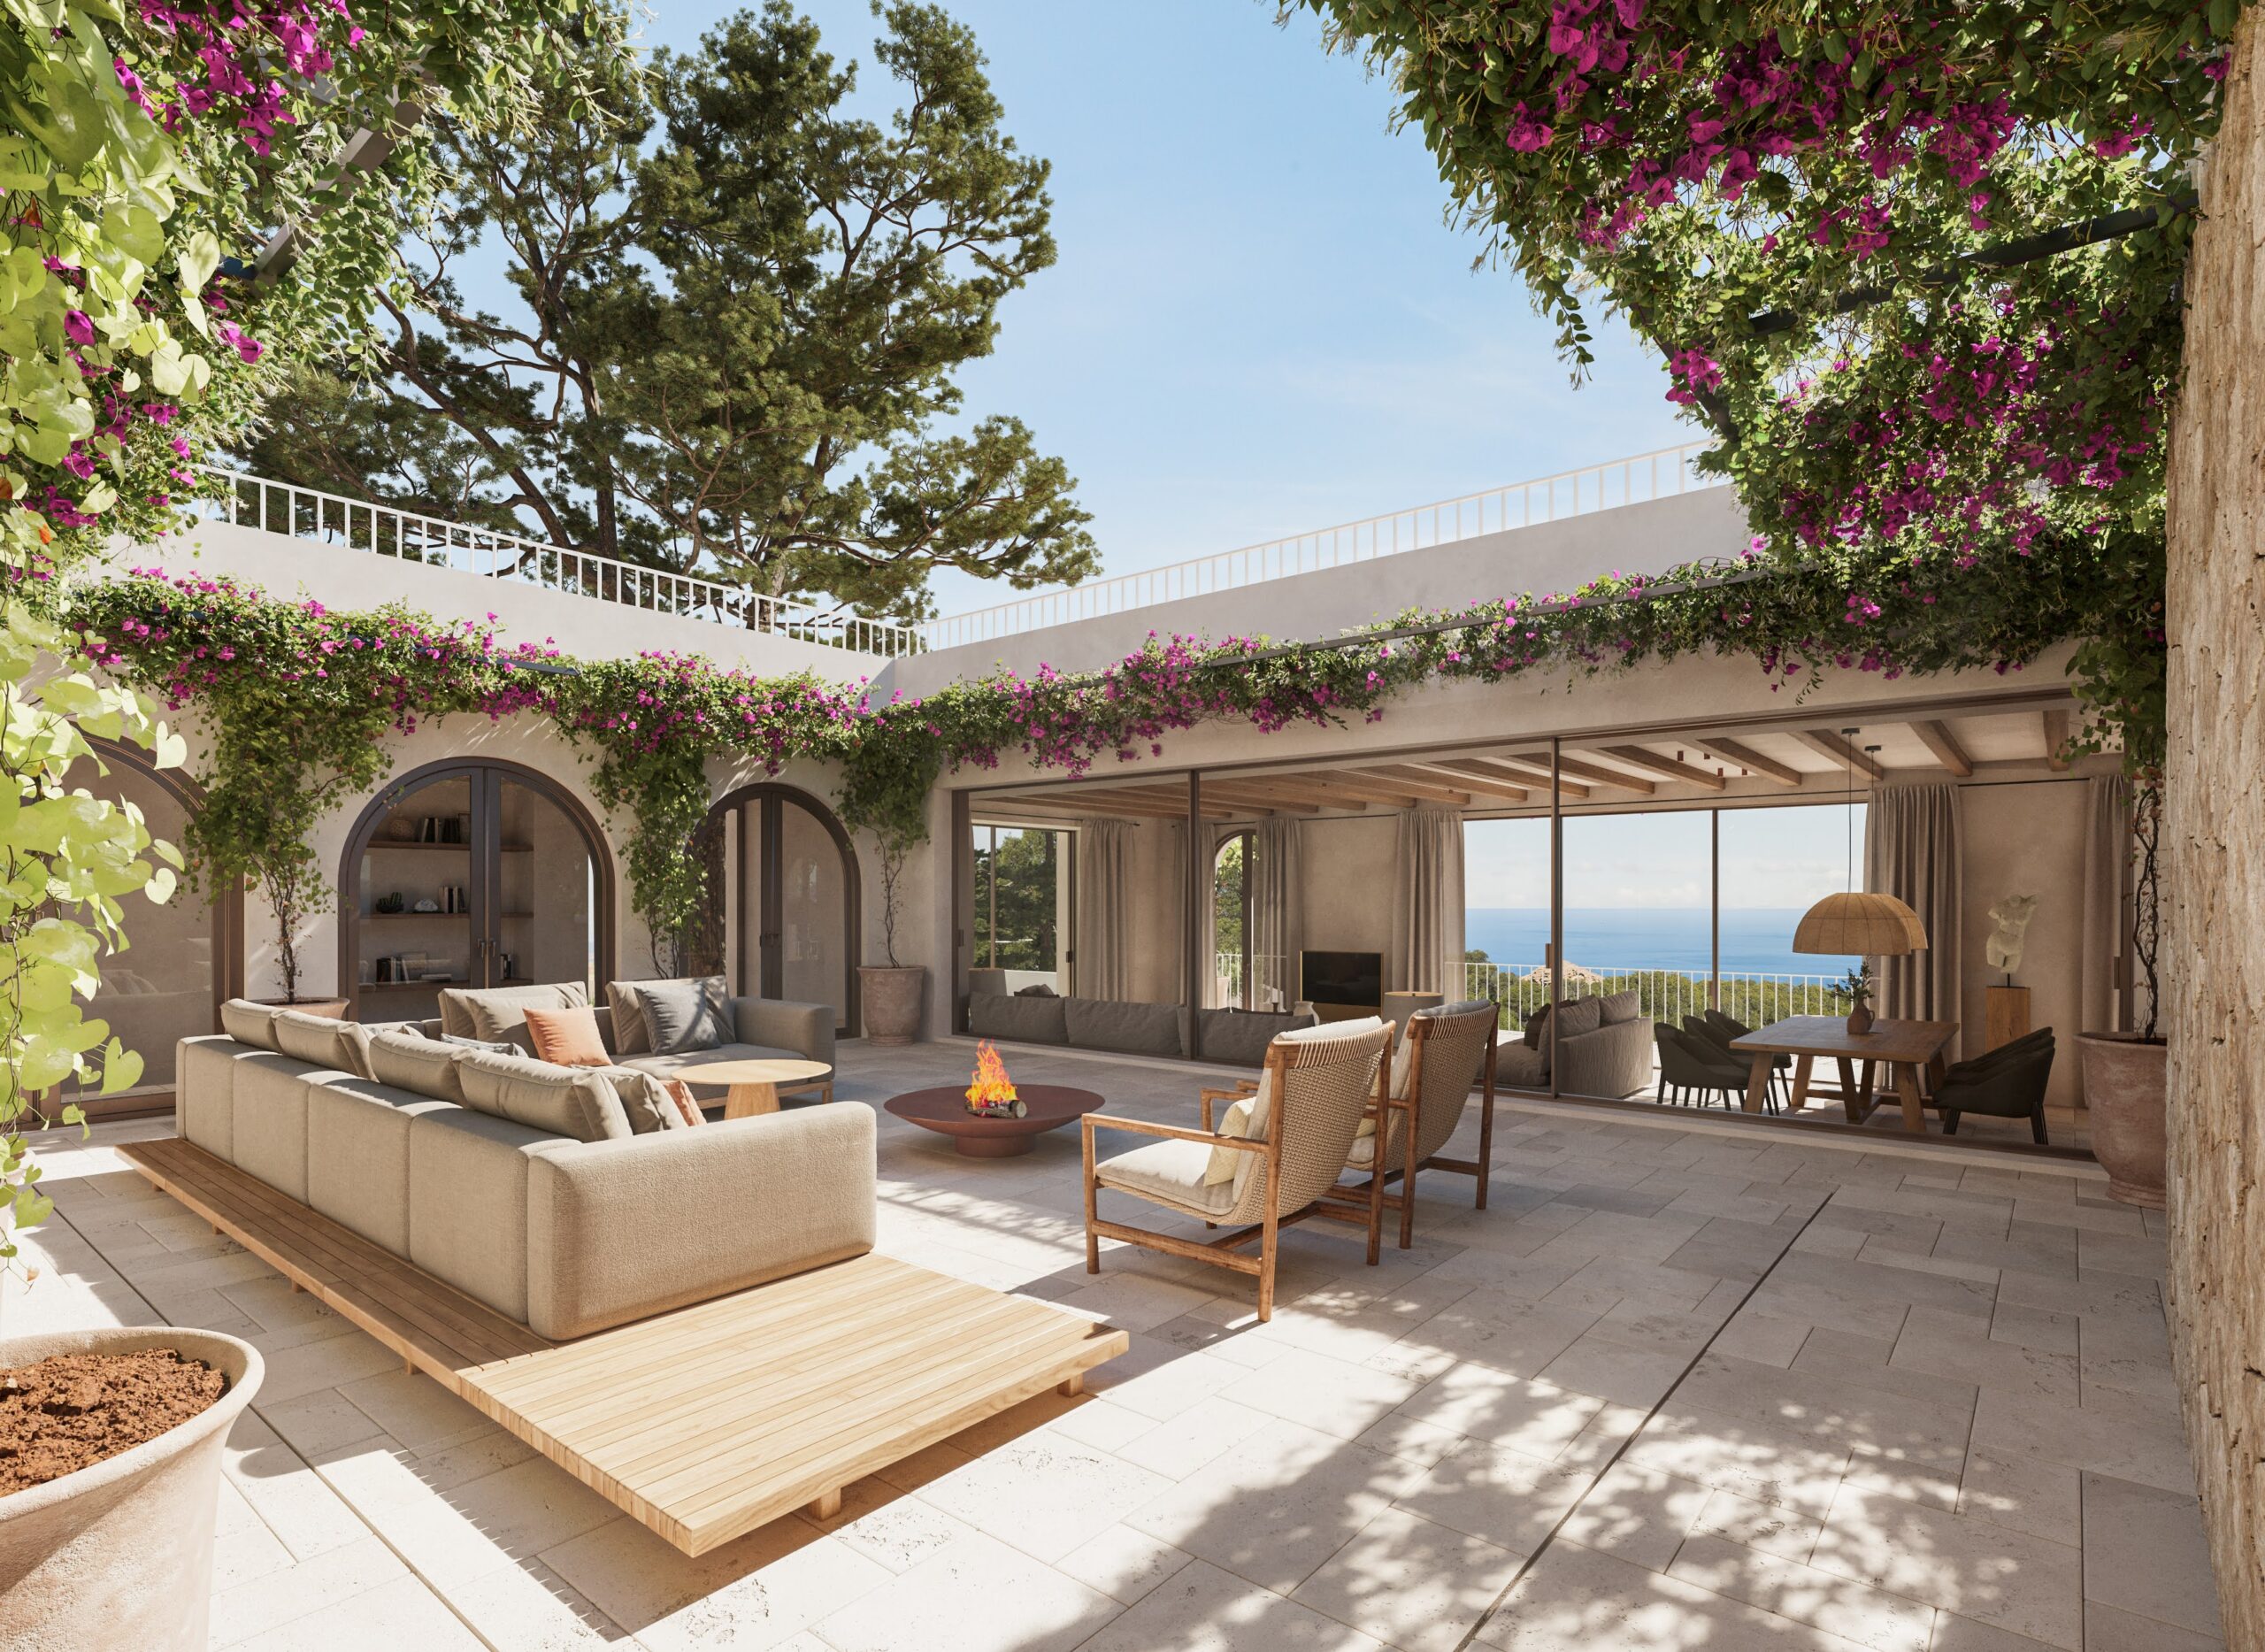 Render showing a design-led courtyard at a luxury villa for sale in Ibiza